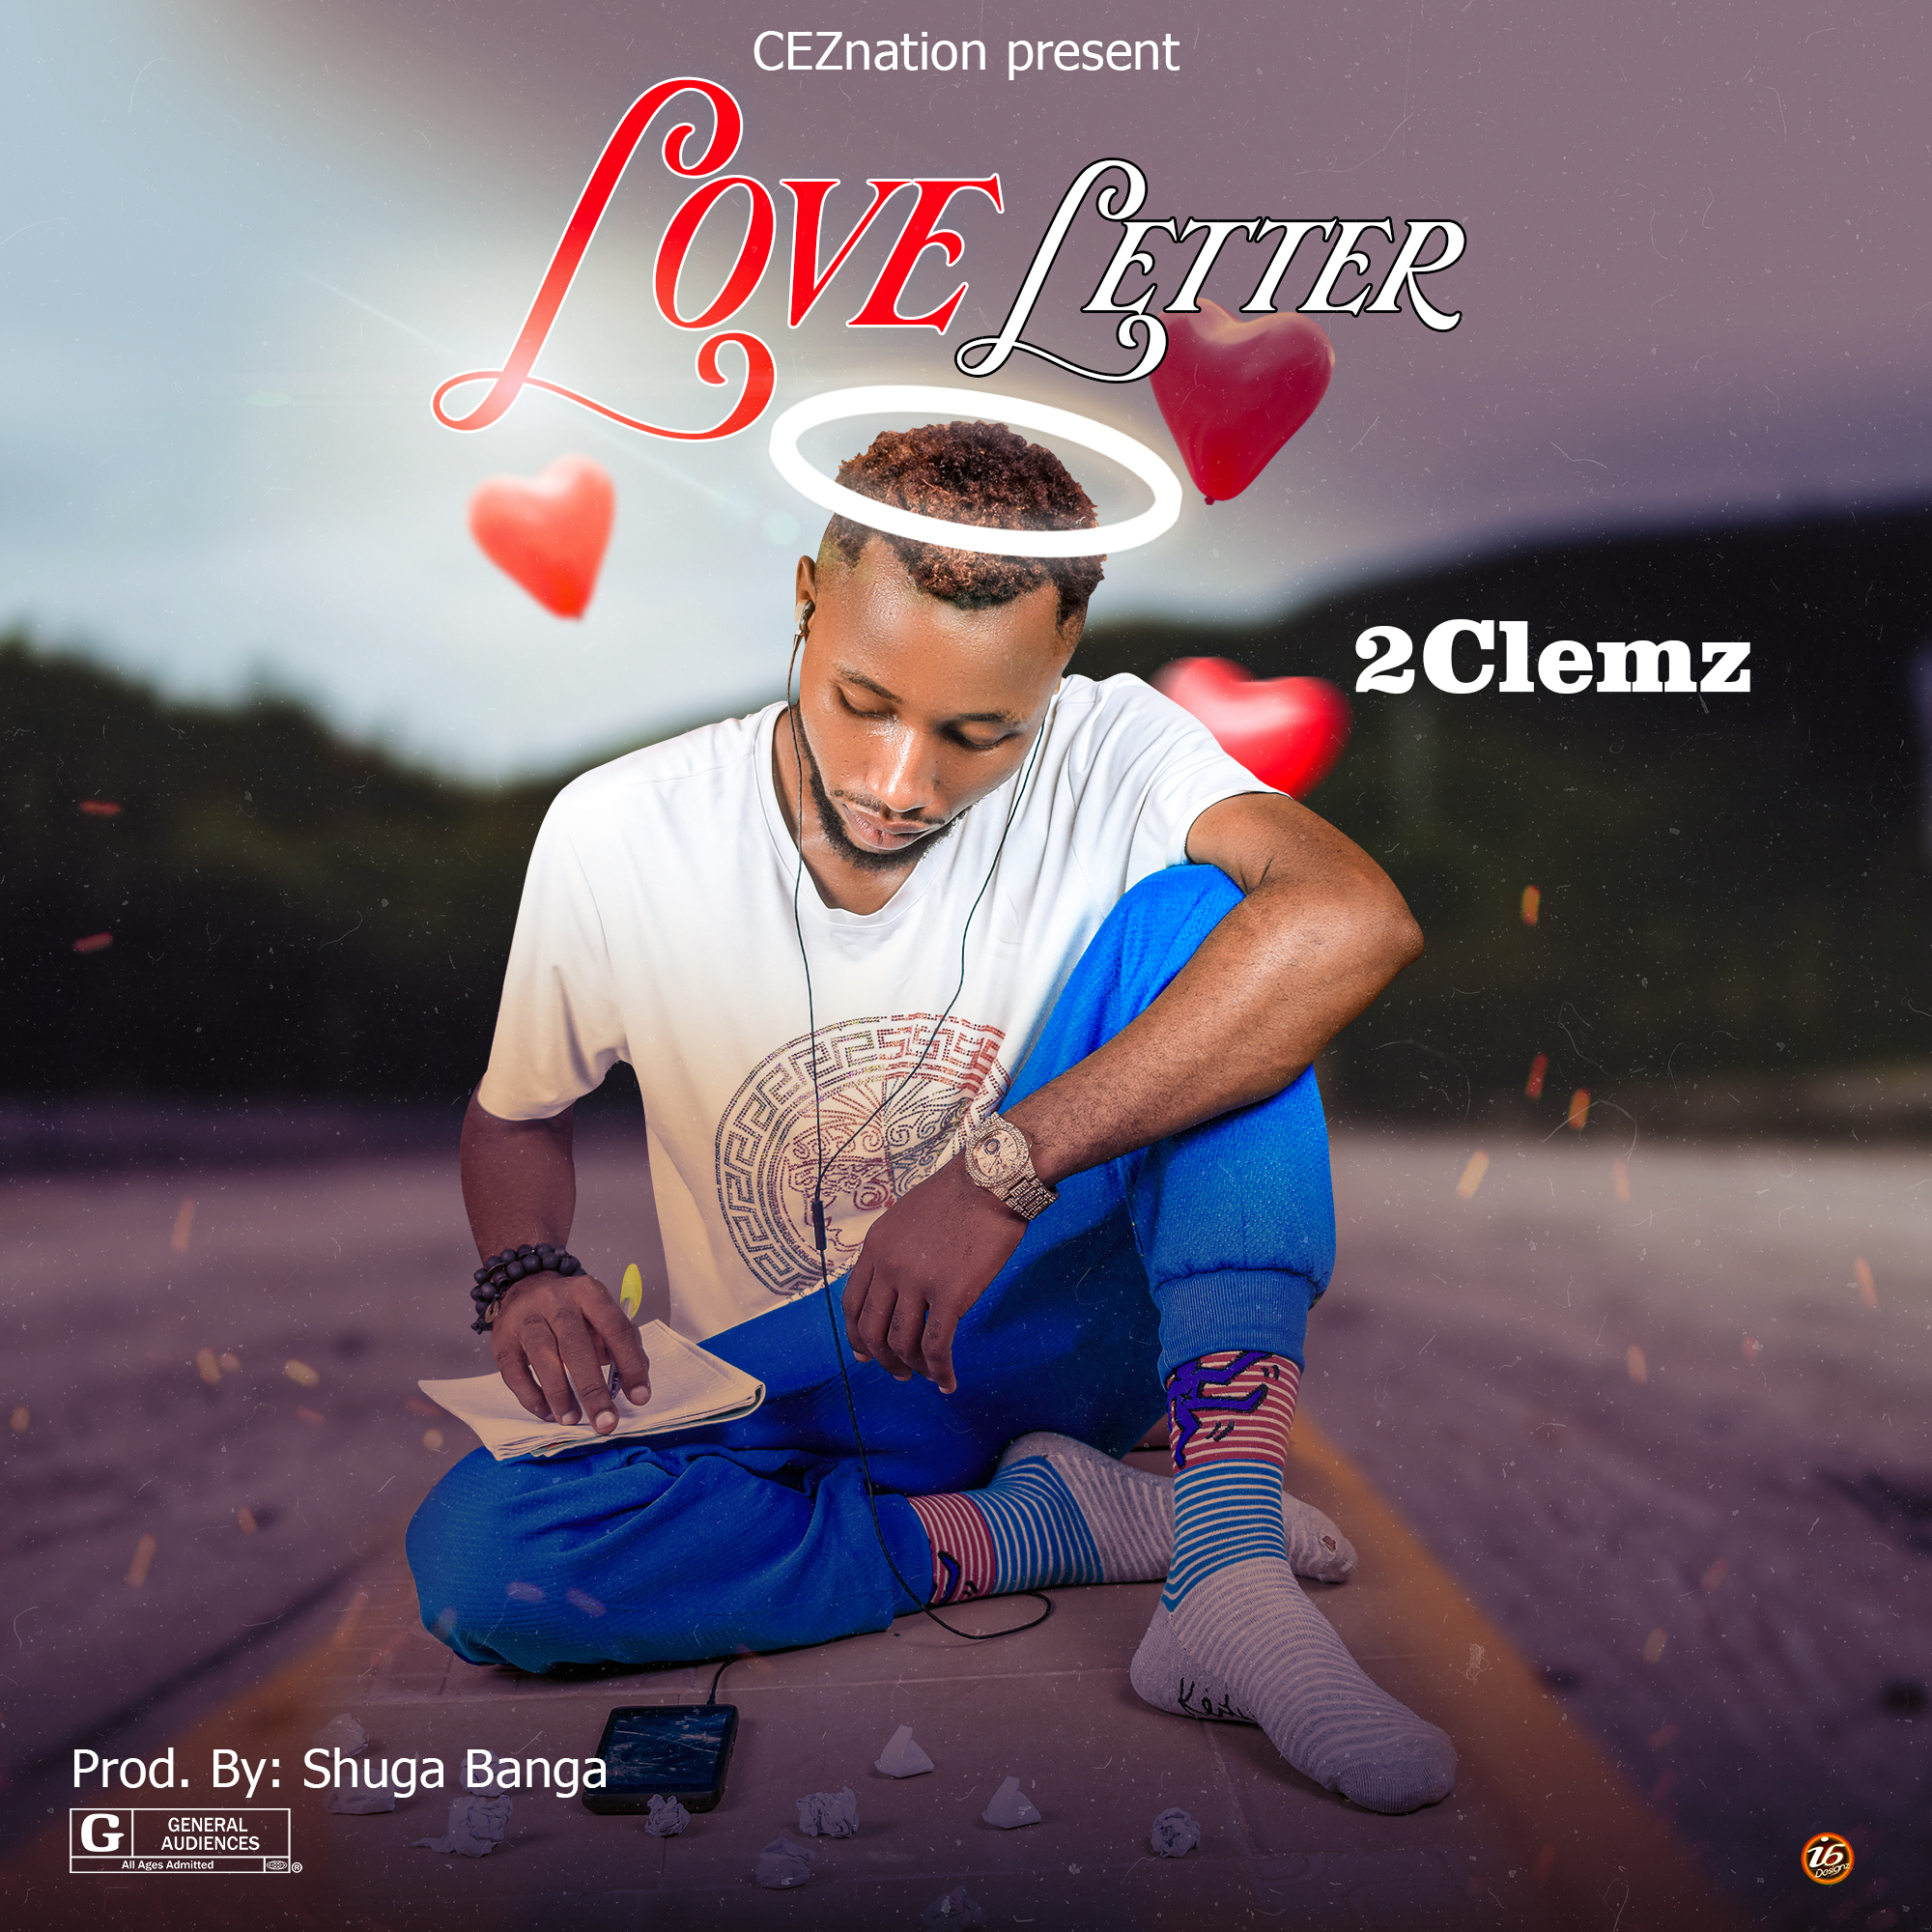 Love letter by 2clemz